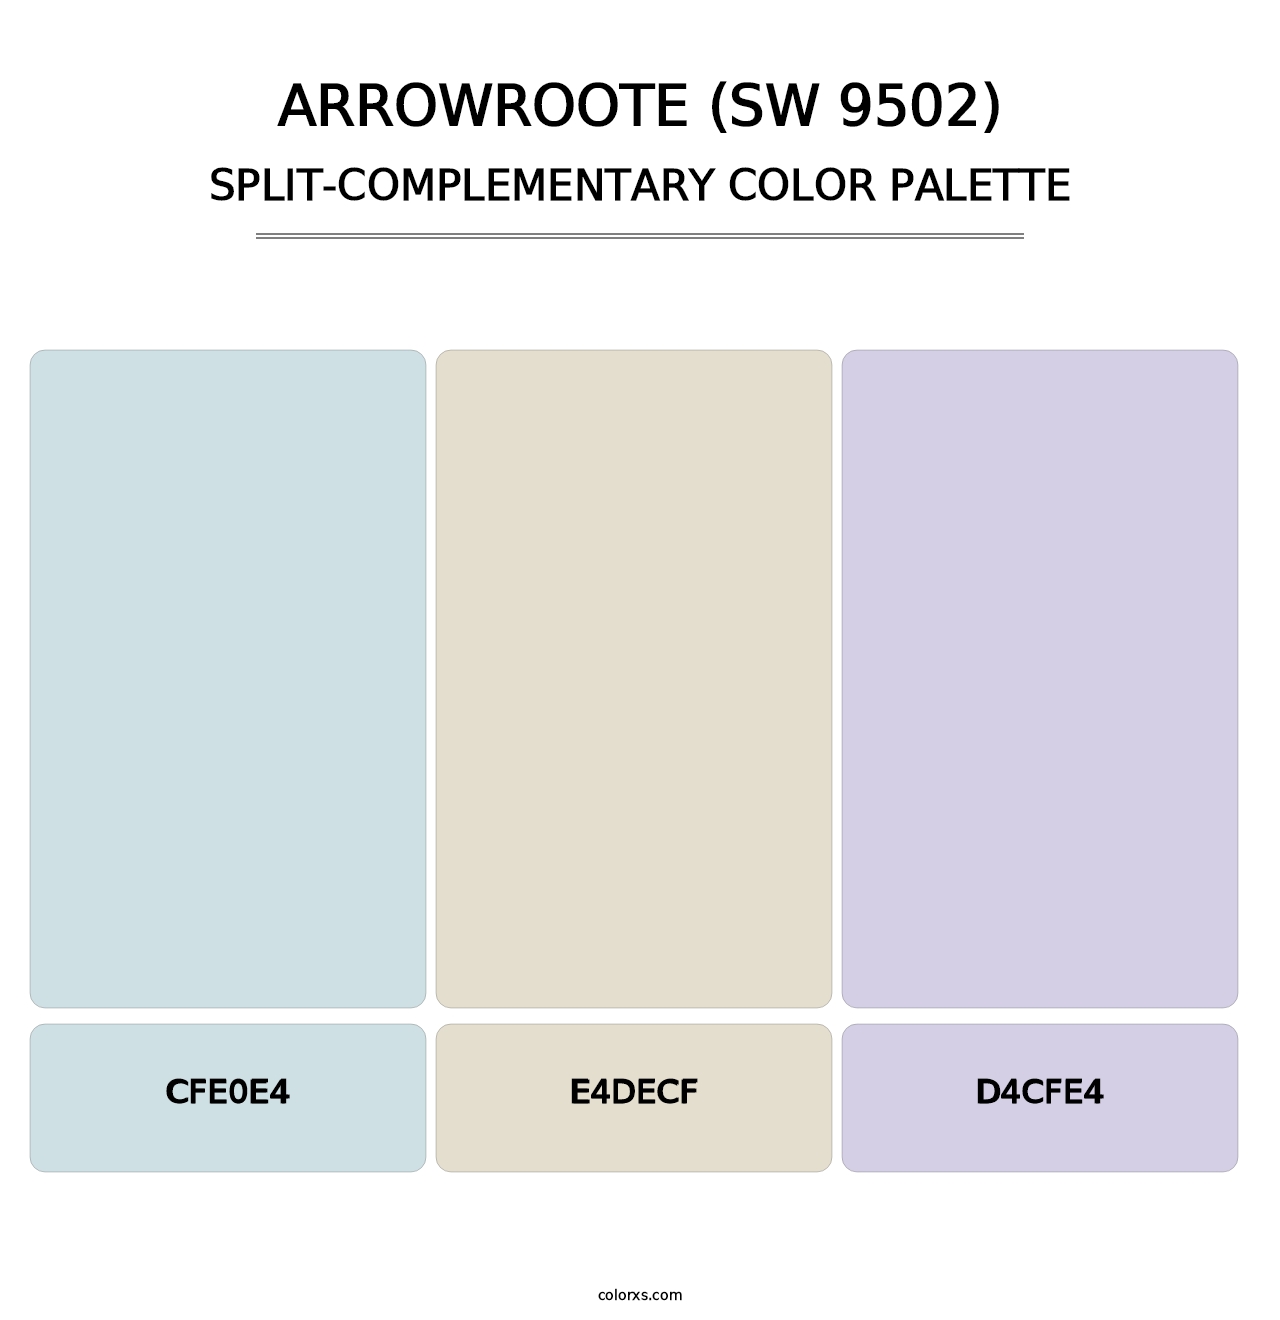 Arrowroote (SW 9502) - Split-Complementary Color Palette